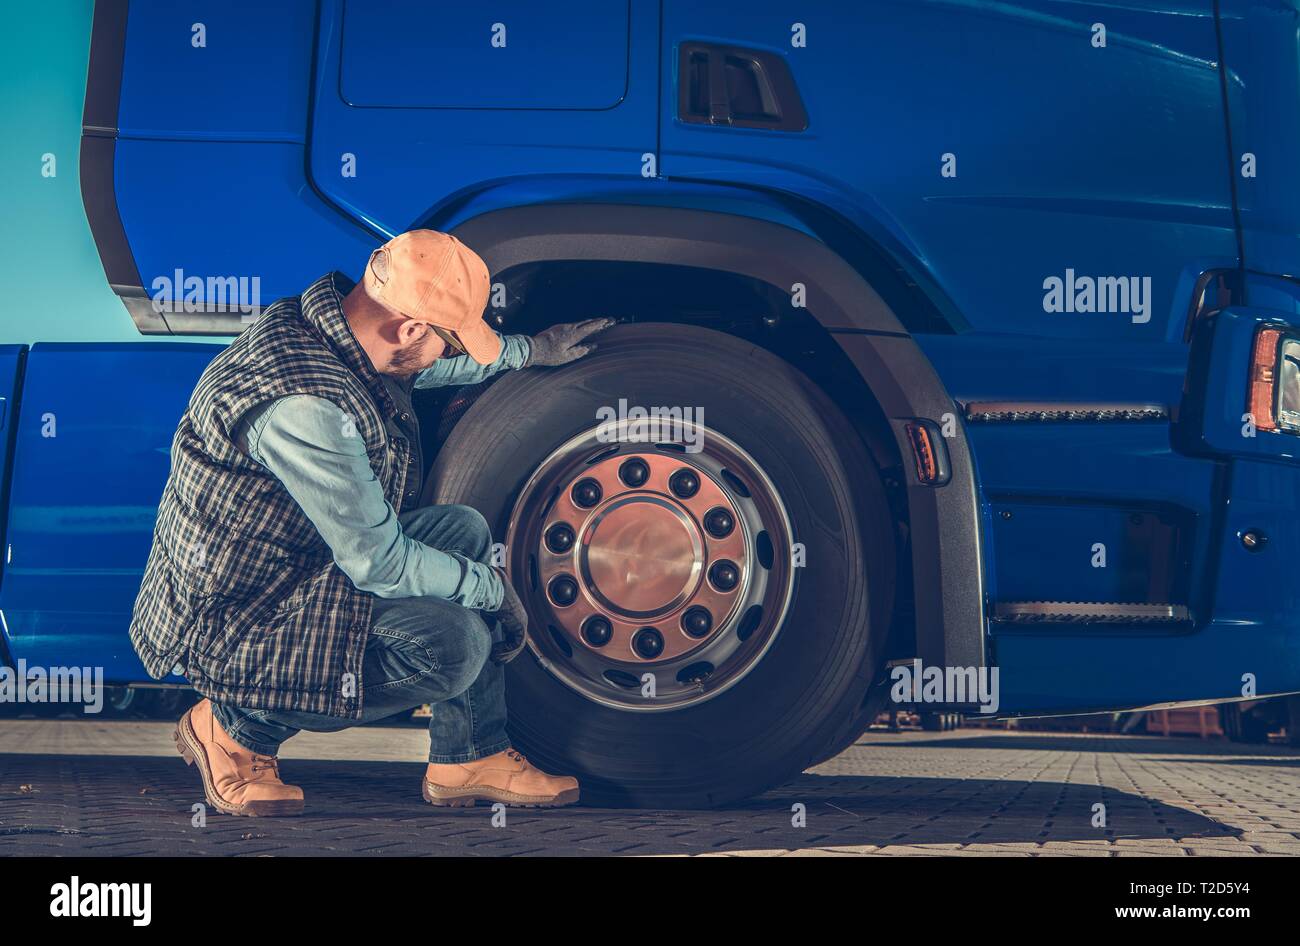 Caucasian Driver Checking Semi Truck Wheels Looking For Potential Issues. Transportation Industry Safety. Stock Photo